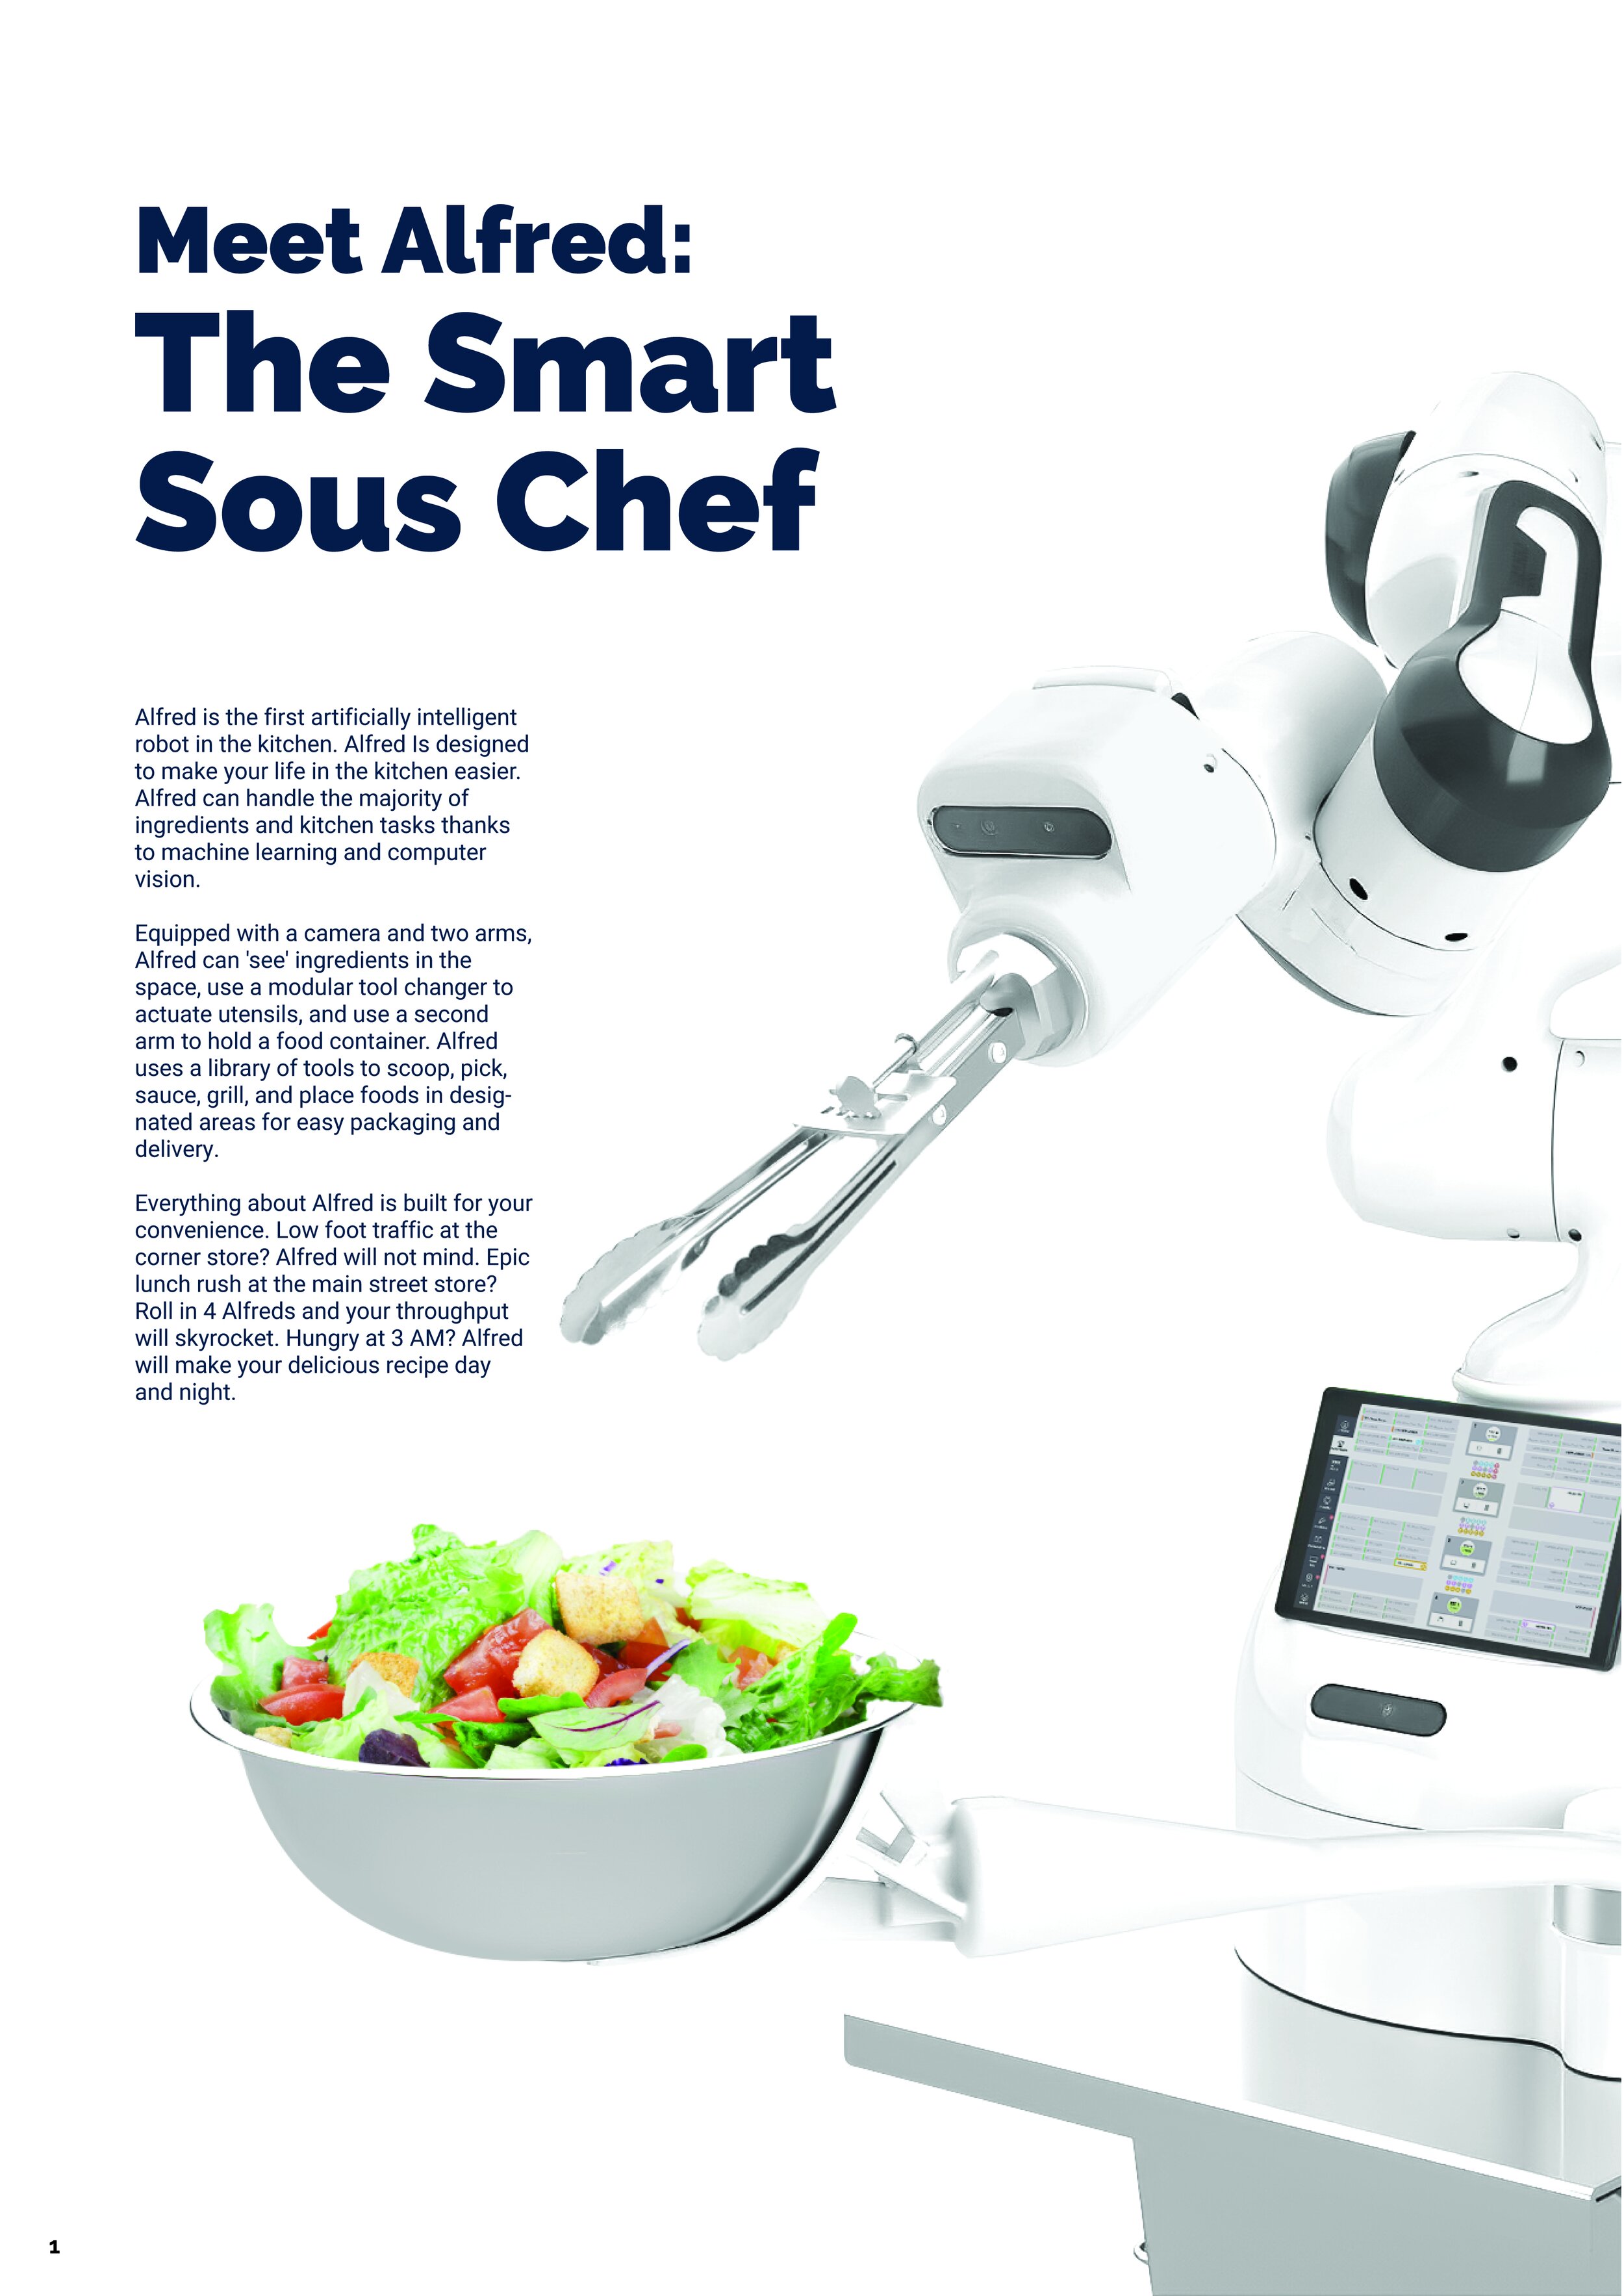 Alfred-Robot Sous Chef FastCompany-01.jpg